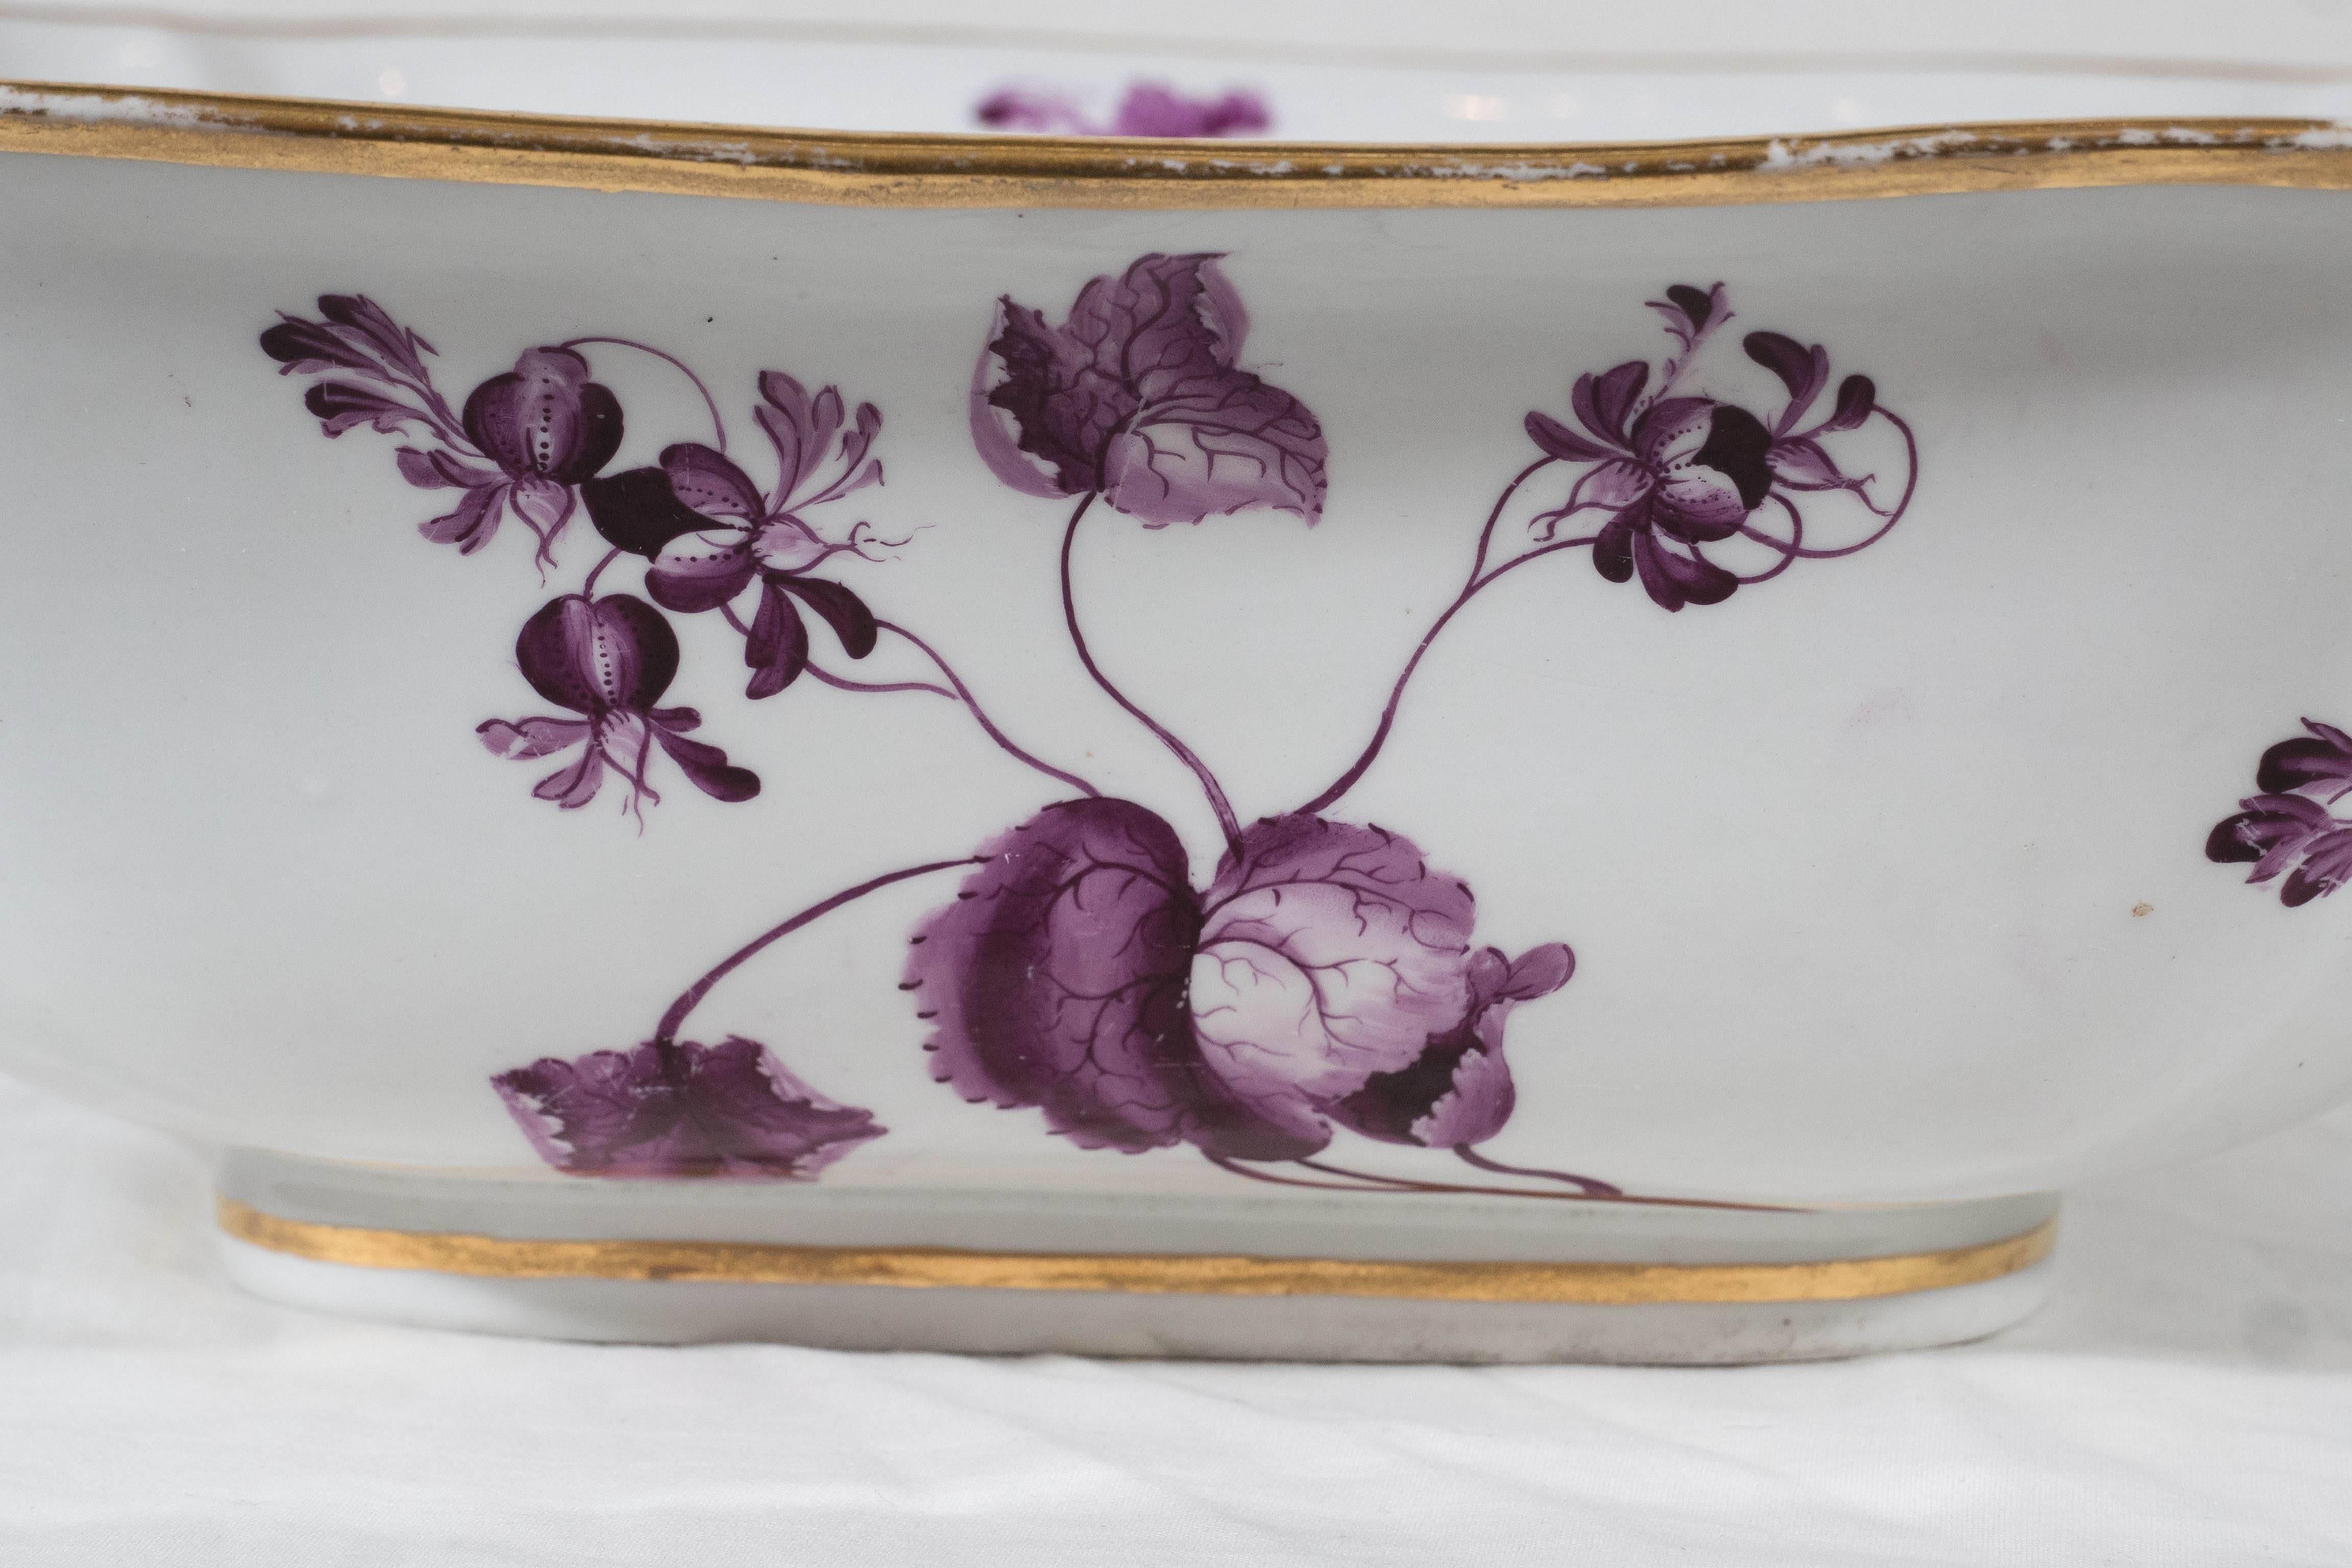 A Barr flight Barr Worcester bowl, square shaped, painted in camaieu rose with flower sprays and gilt rim. The underside with impressed BFB below a crown indicating that Barr flight Barr Worcester were purveyors to their majesties.
For an image and